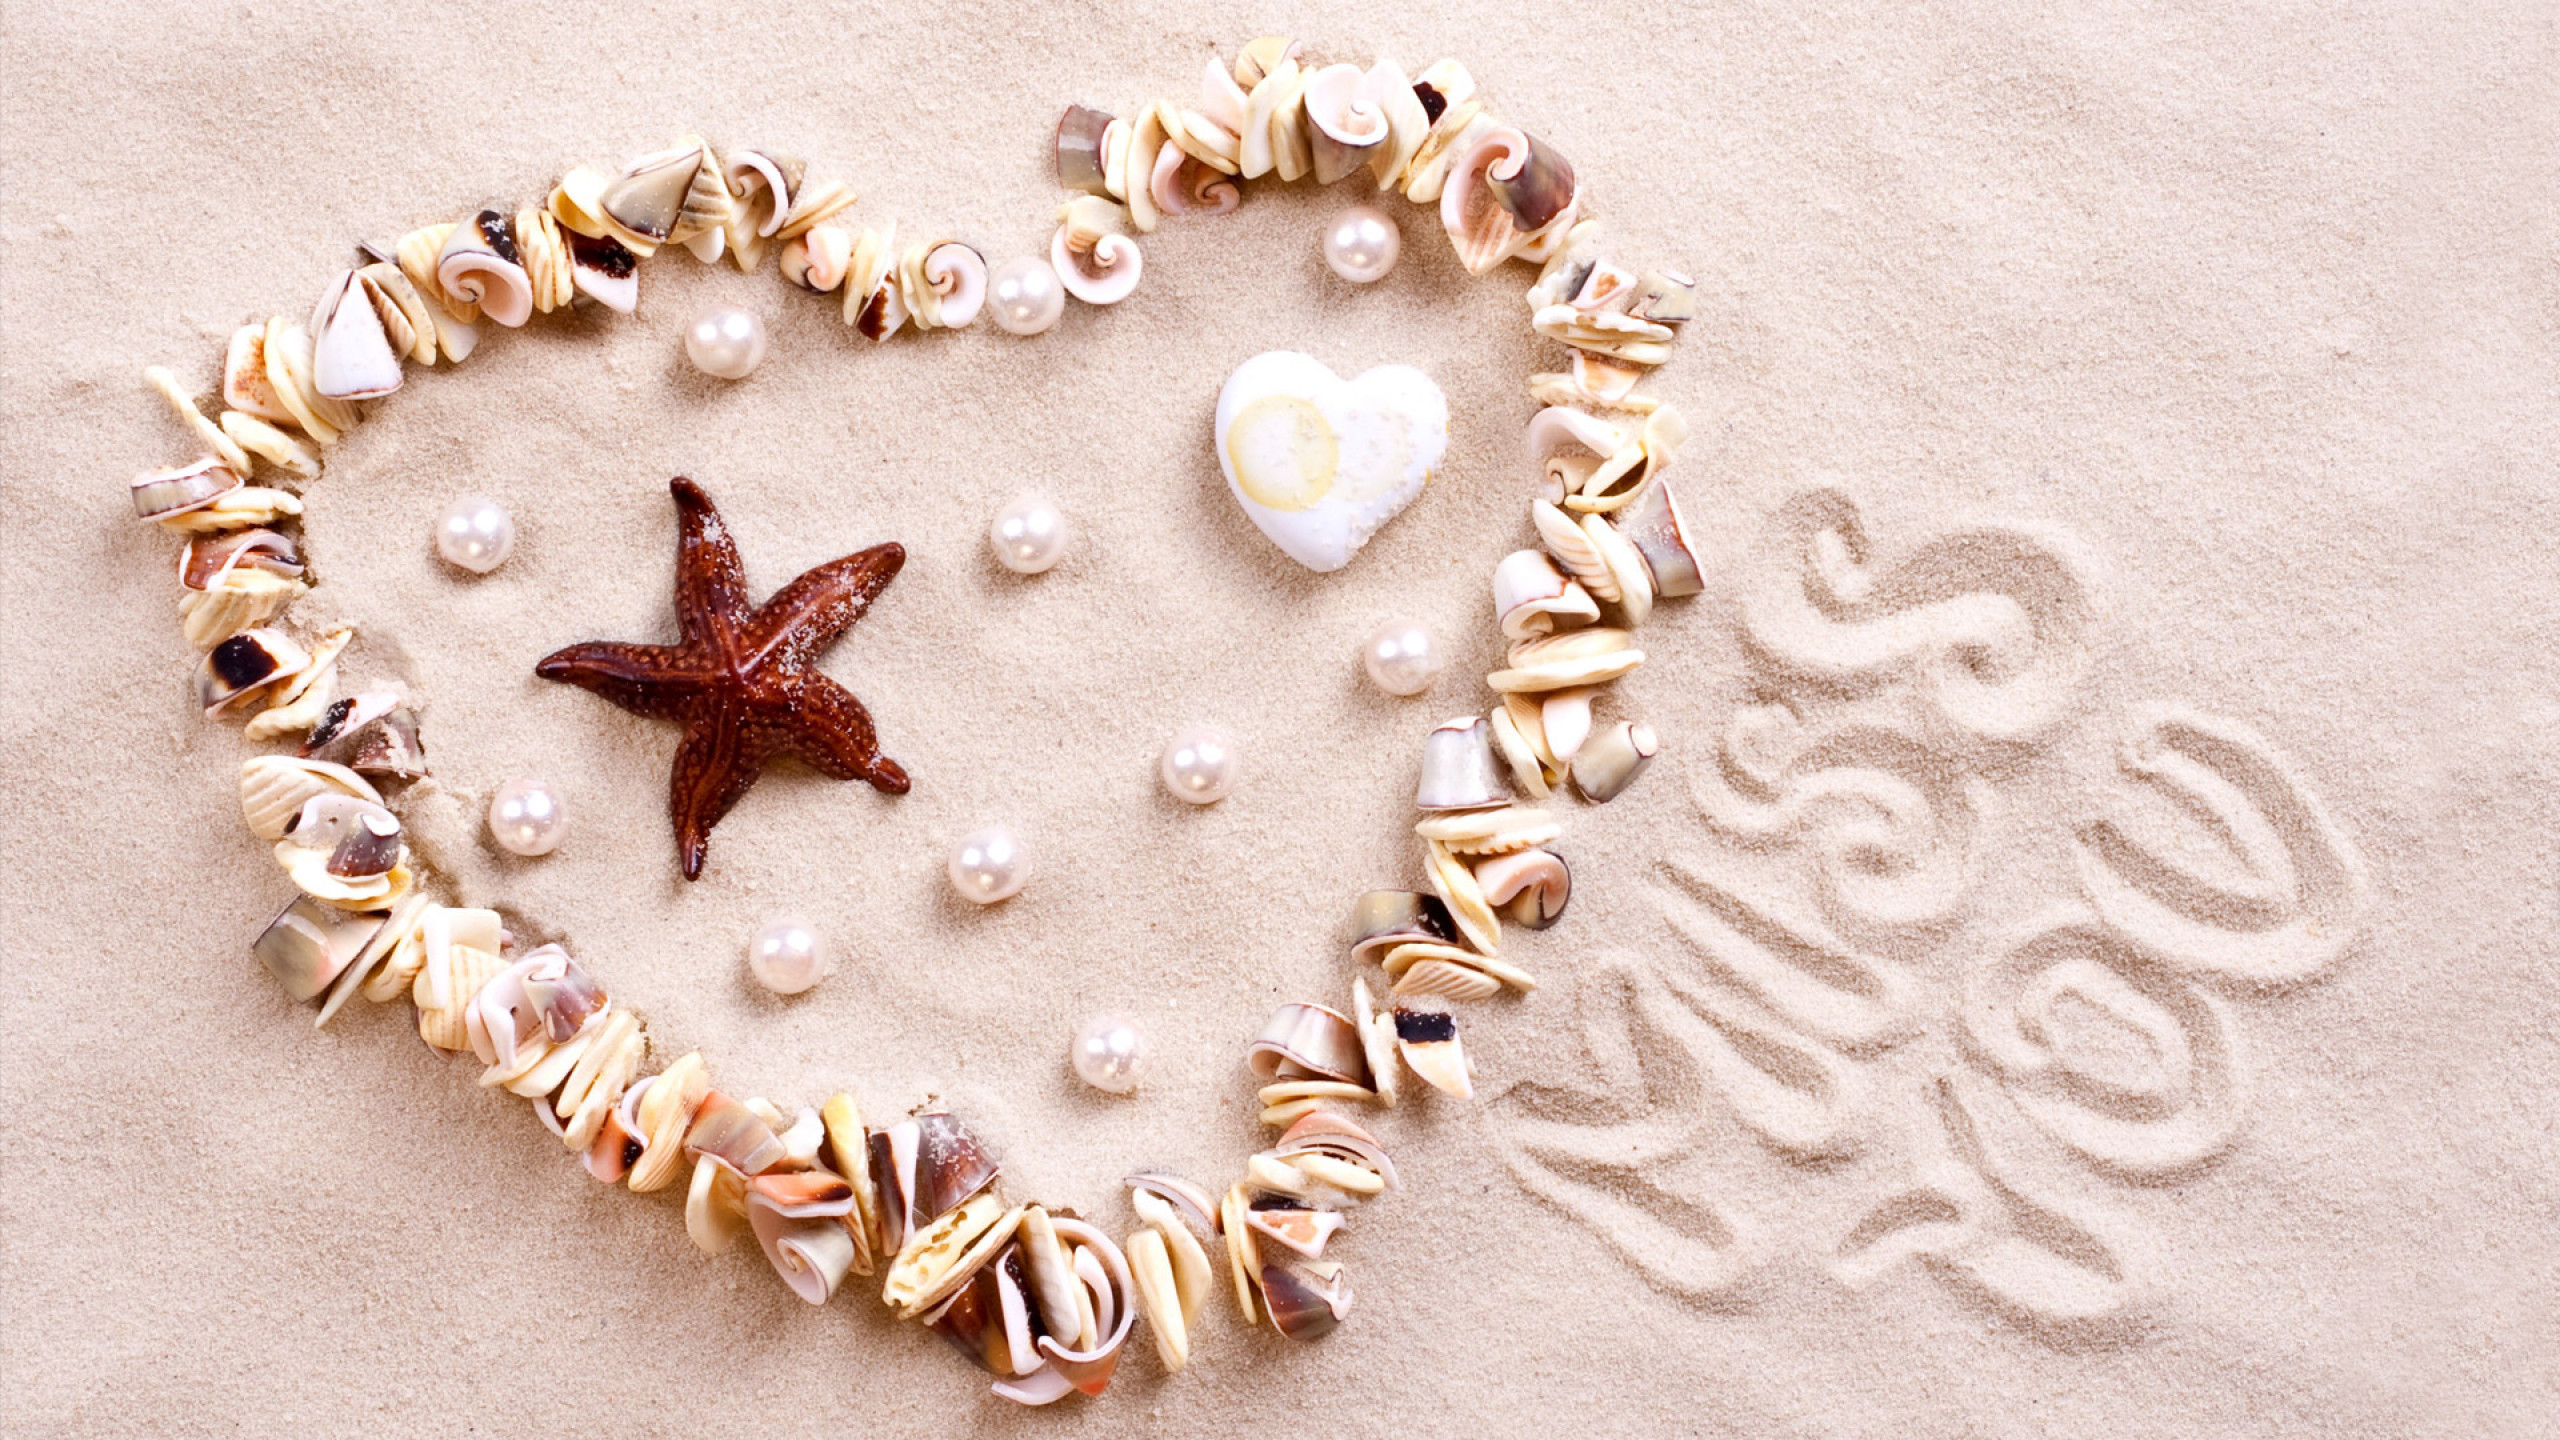 Stock Images love image, heart, starfish, shell, shore, 4k, Stock Images  #15304 - Page 4